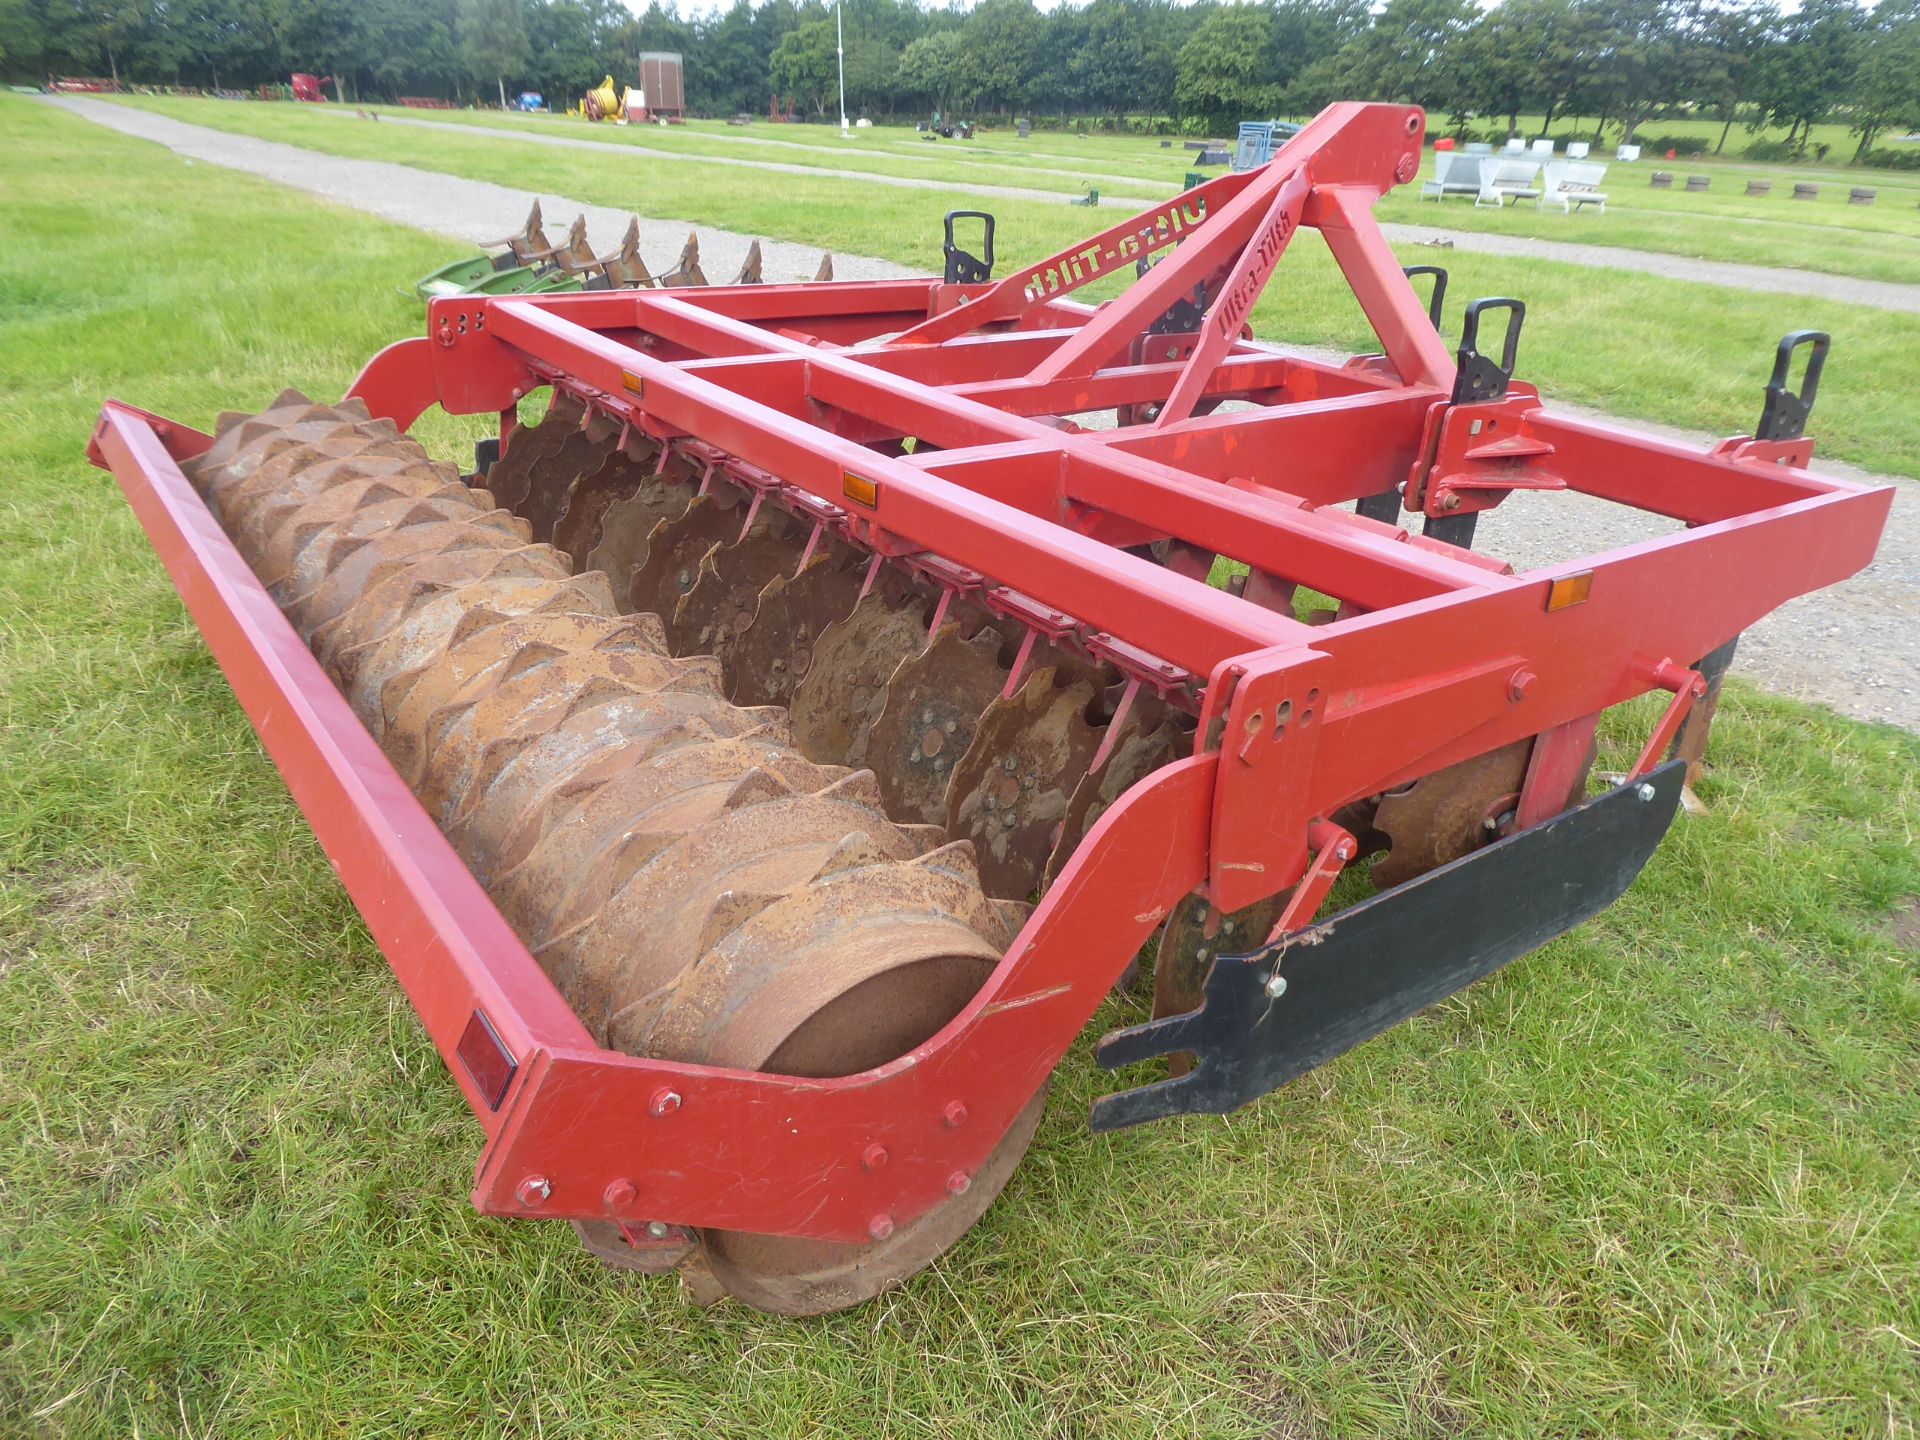 Farmforce Ultratilth 3m cultivator, c/w 6 Metcalfe legs, new discs and scrapers, very good - Image 2 of 3